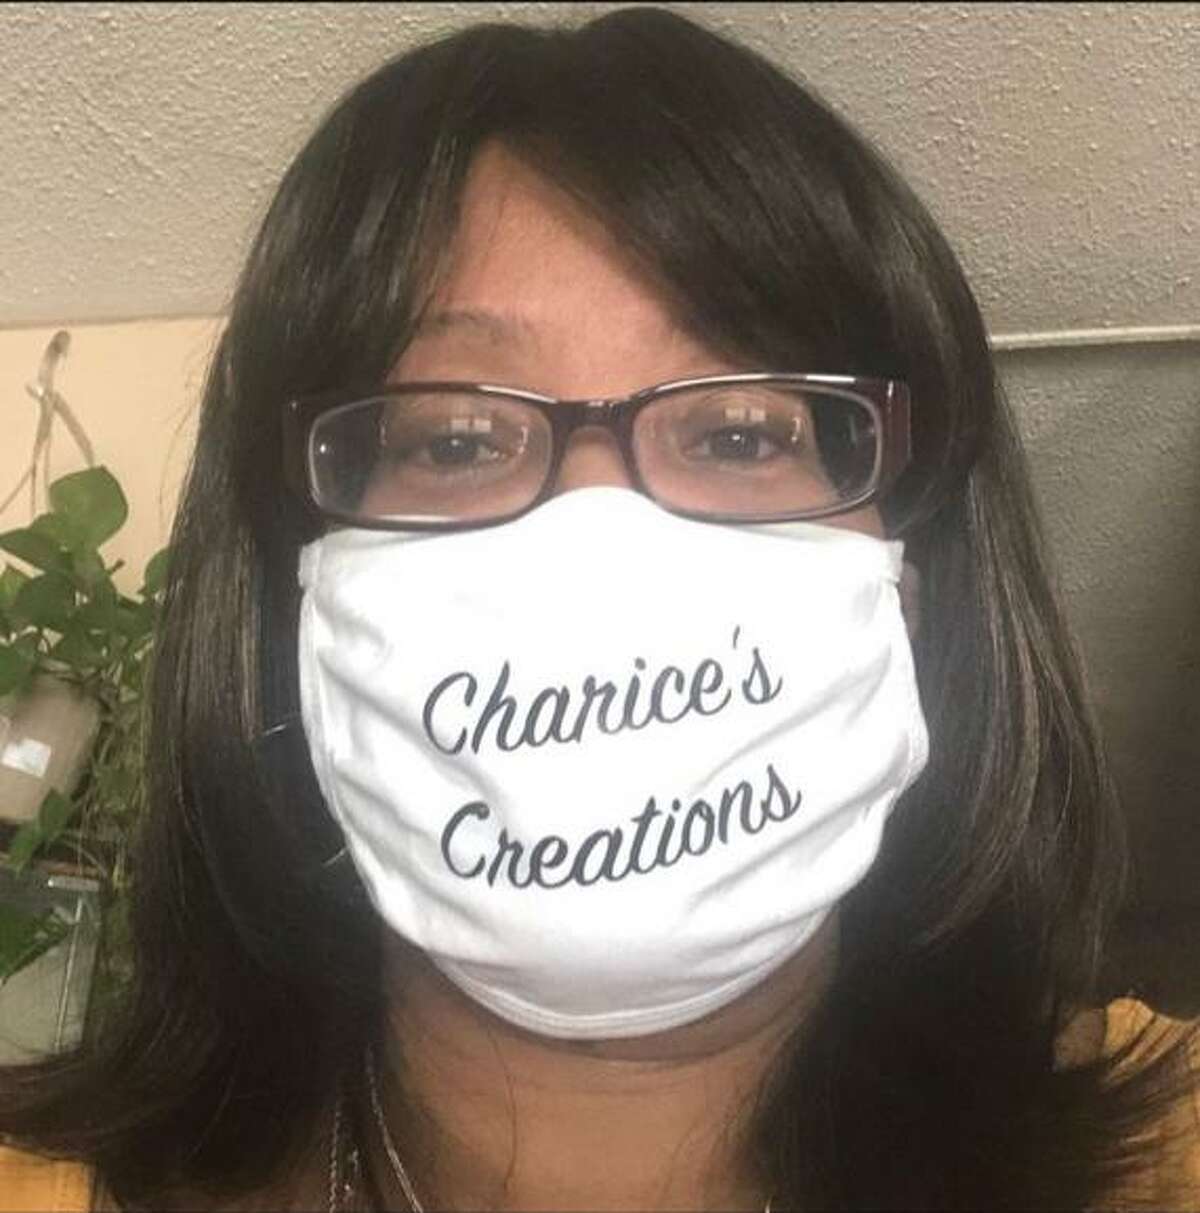 Simone Darby, a nurse who took up crafting to cope with the stress of the pandemic — then turned it into a side business — poses with a mask bearing the name of that business, “Charice’s Creations.” Her middle name is Charice.